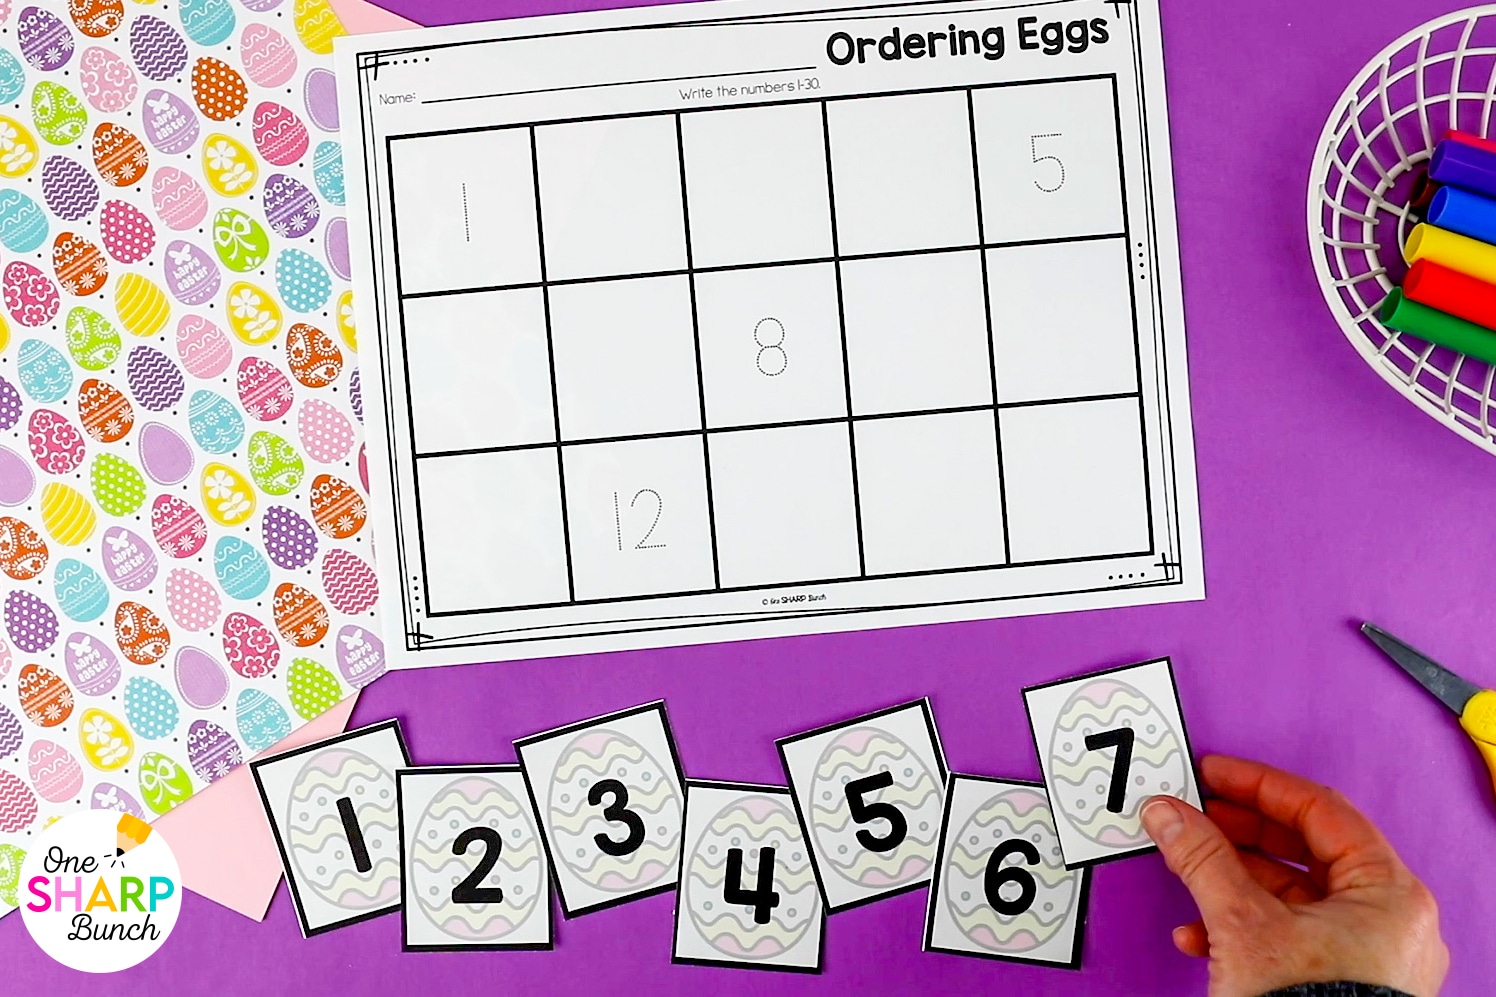 Discover who has stolen the Easter eggs, while reviewing math and literacy skills, with these Easter escape room spring activities for kids! Students will complete up to eight different Easter centers for kindergarten. At the spring literacy centers and spring math centers, the students practice CVC words, syllables, digraphs, blends, subtracting from 5, decomposing 10, extending patterns and ordering numbers. Easily plan your Easter activities with these spring centers for kindergarten!